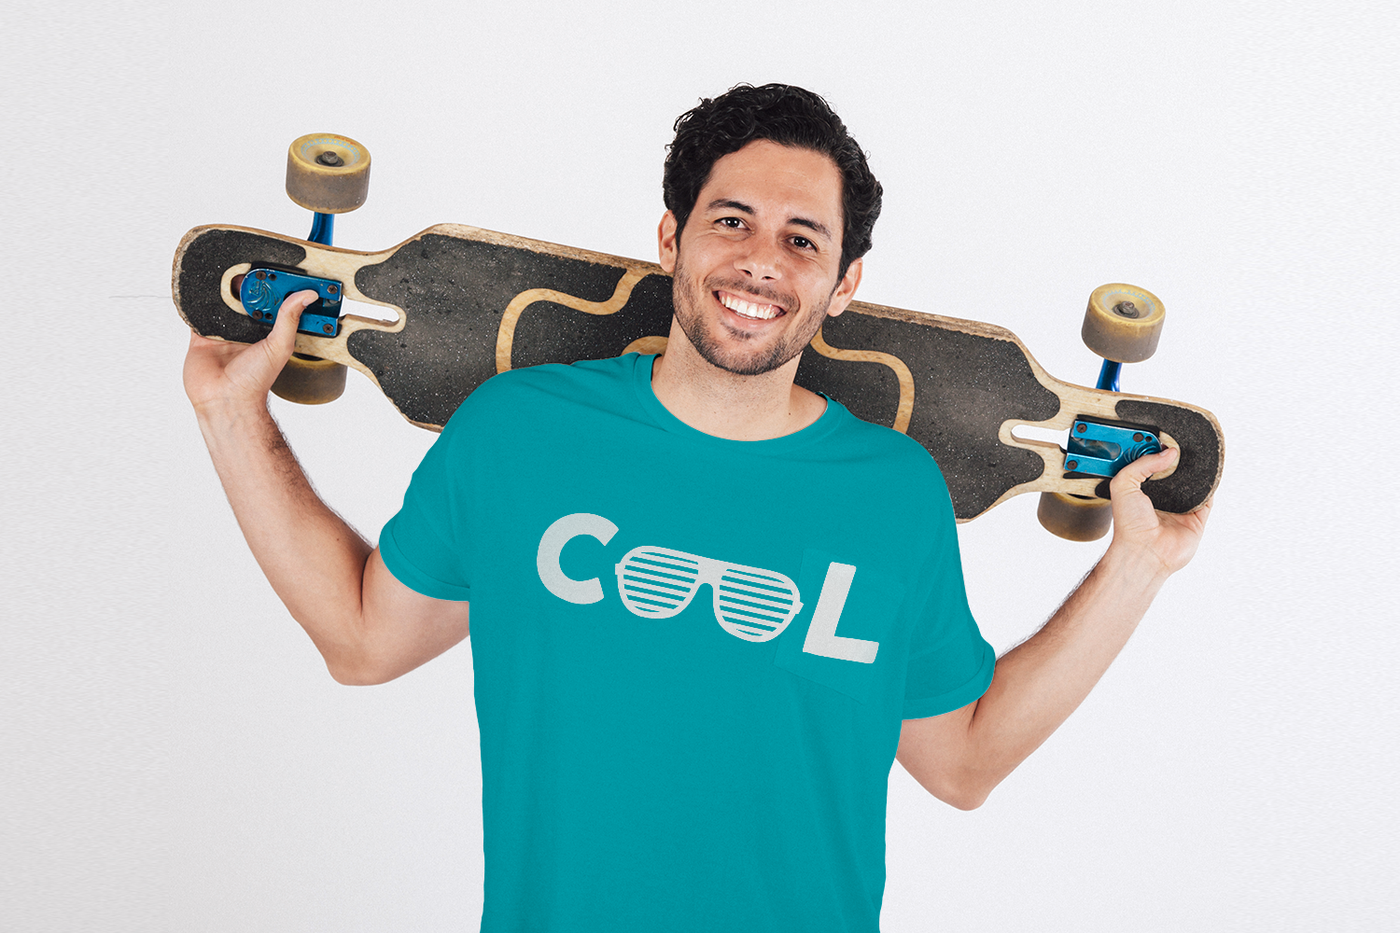 Smiling white man with a skateboard wears a shirt that says "Cool." The Os are a pair of shutter shades.